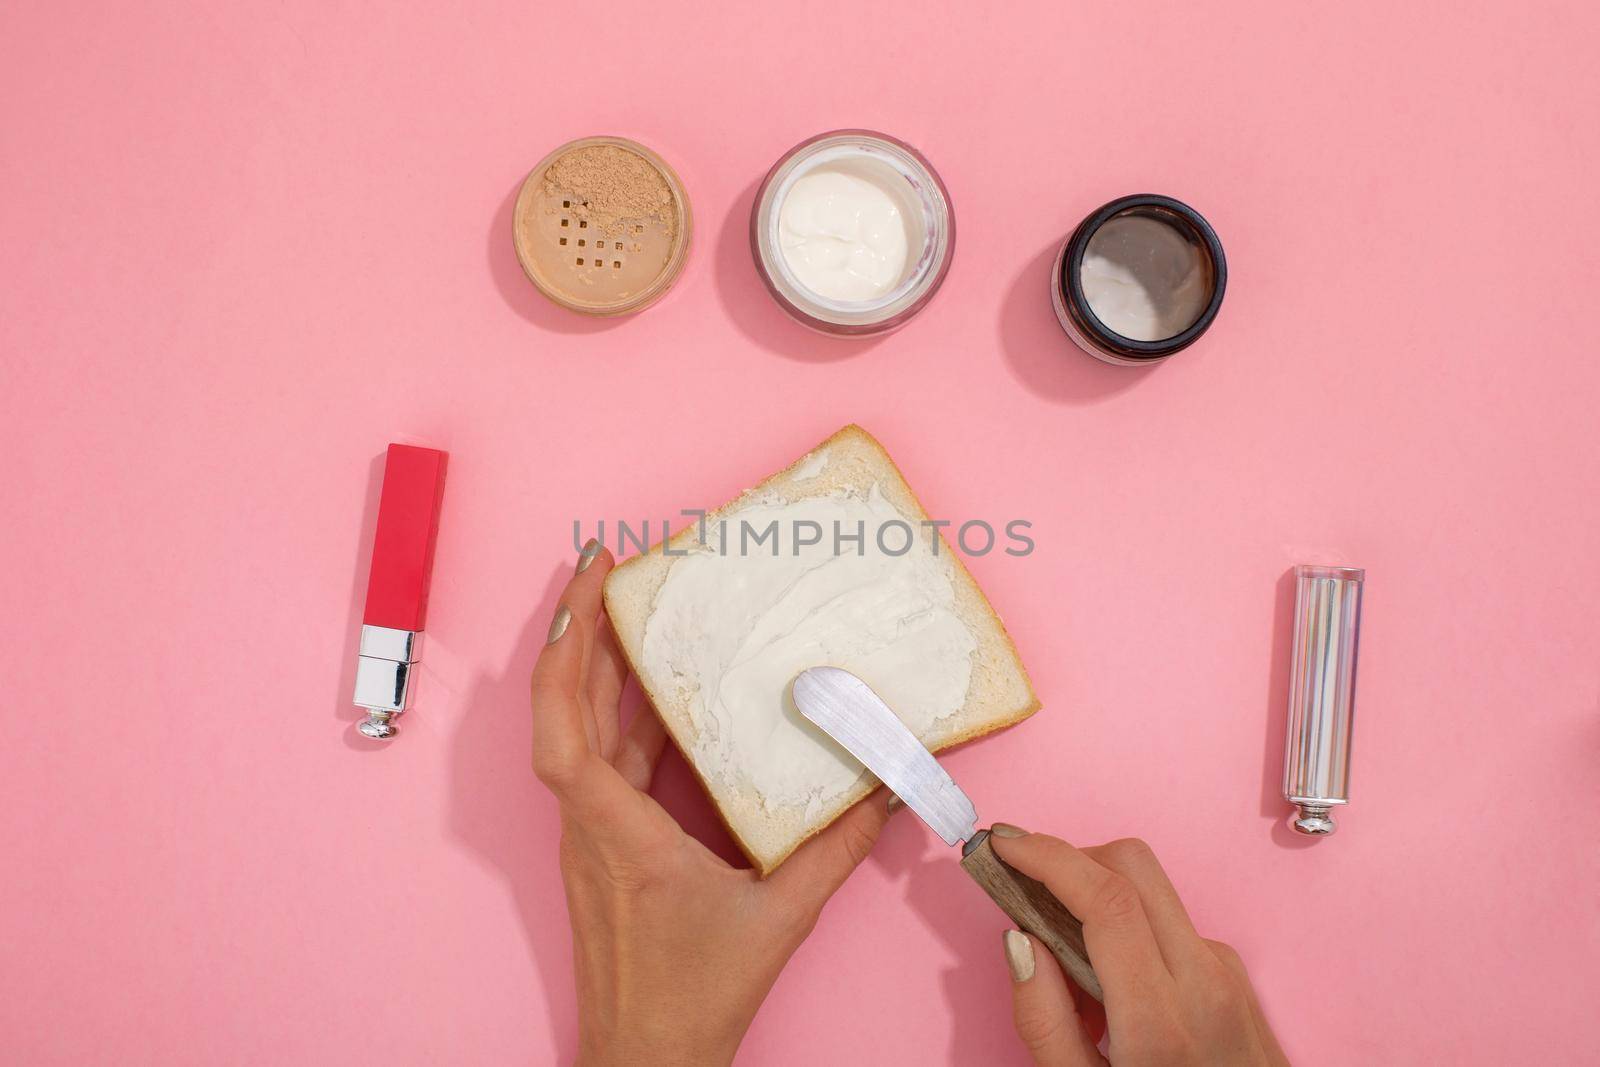 Female hands smear cosmetic cream on a piece of bread for a truck next to cosmetics and jars of supplies